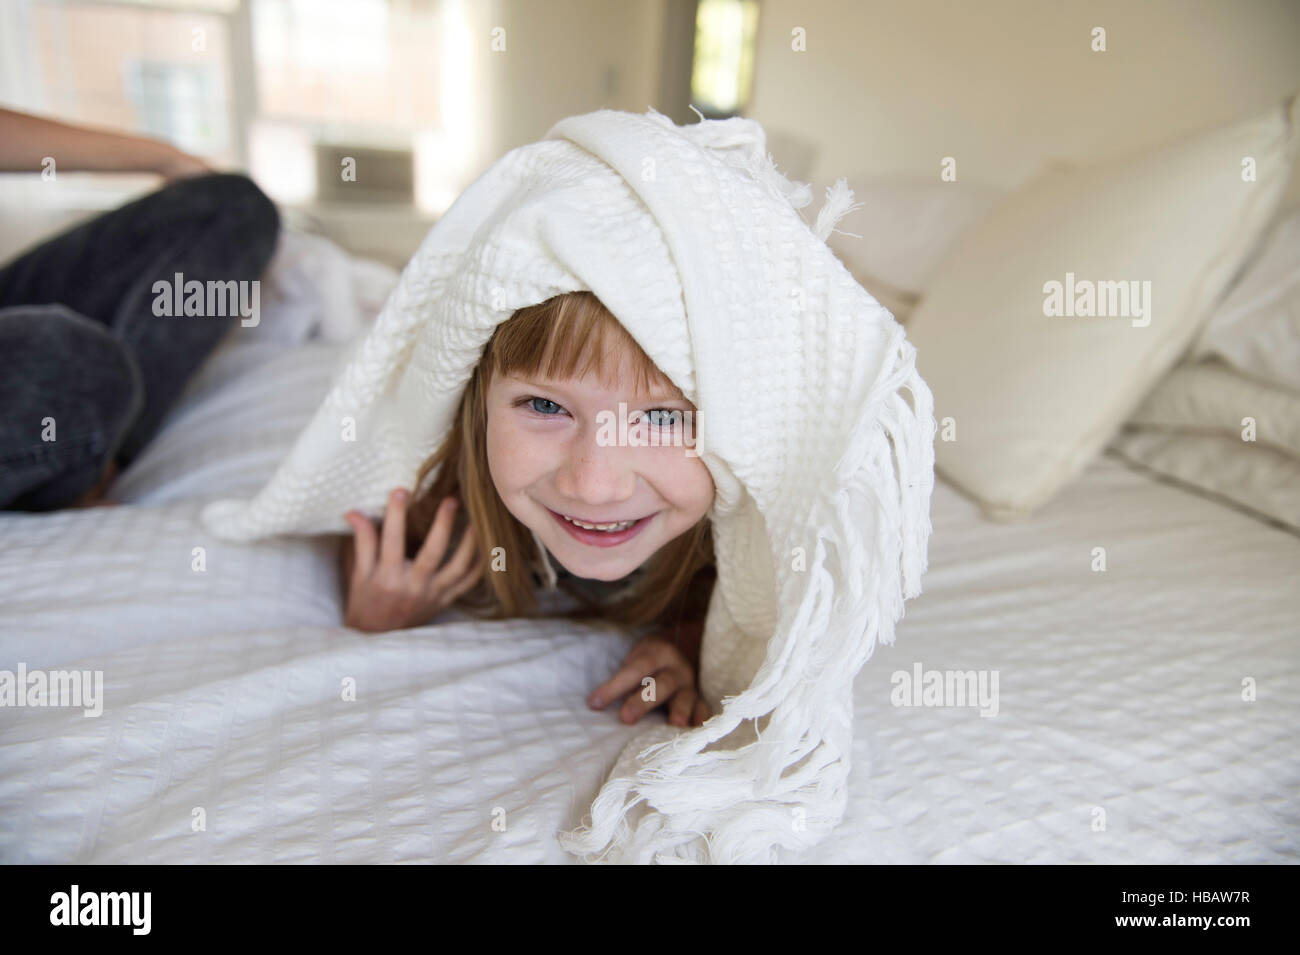 Young girl peeking head out from under blanket on bed Stock Photo